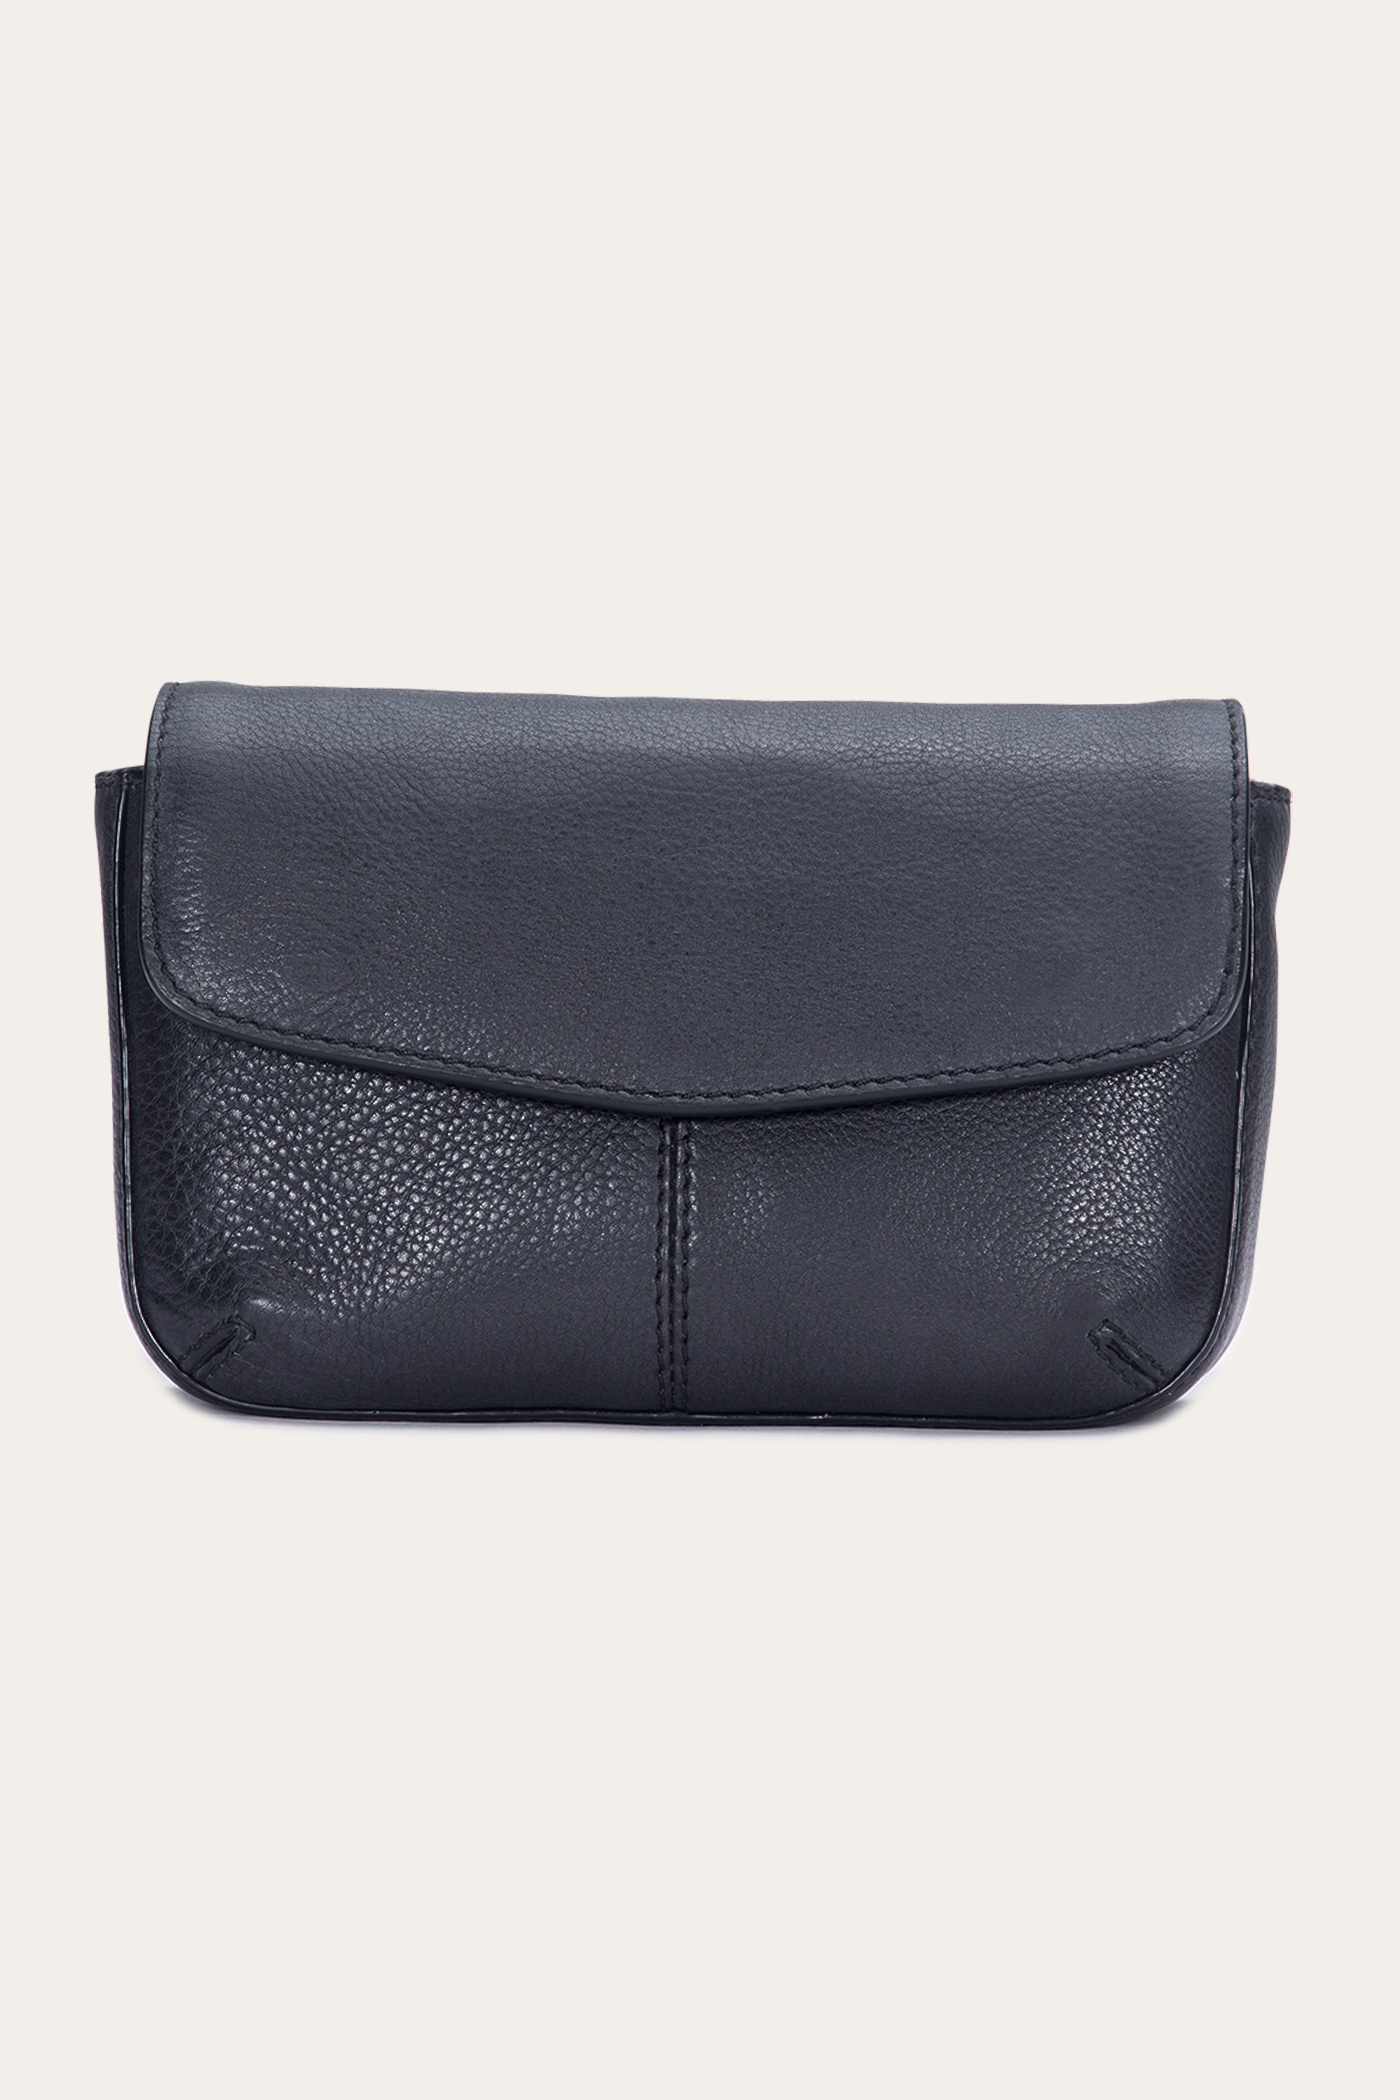 The Frye Company Frye Claire Belt Bag In Black